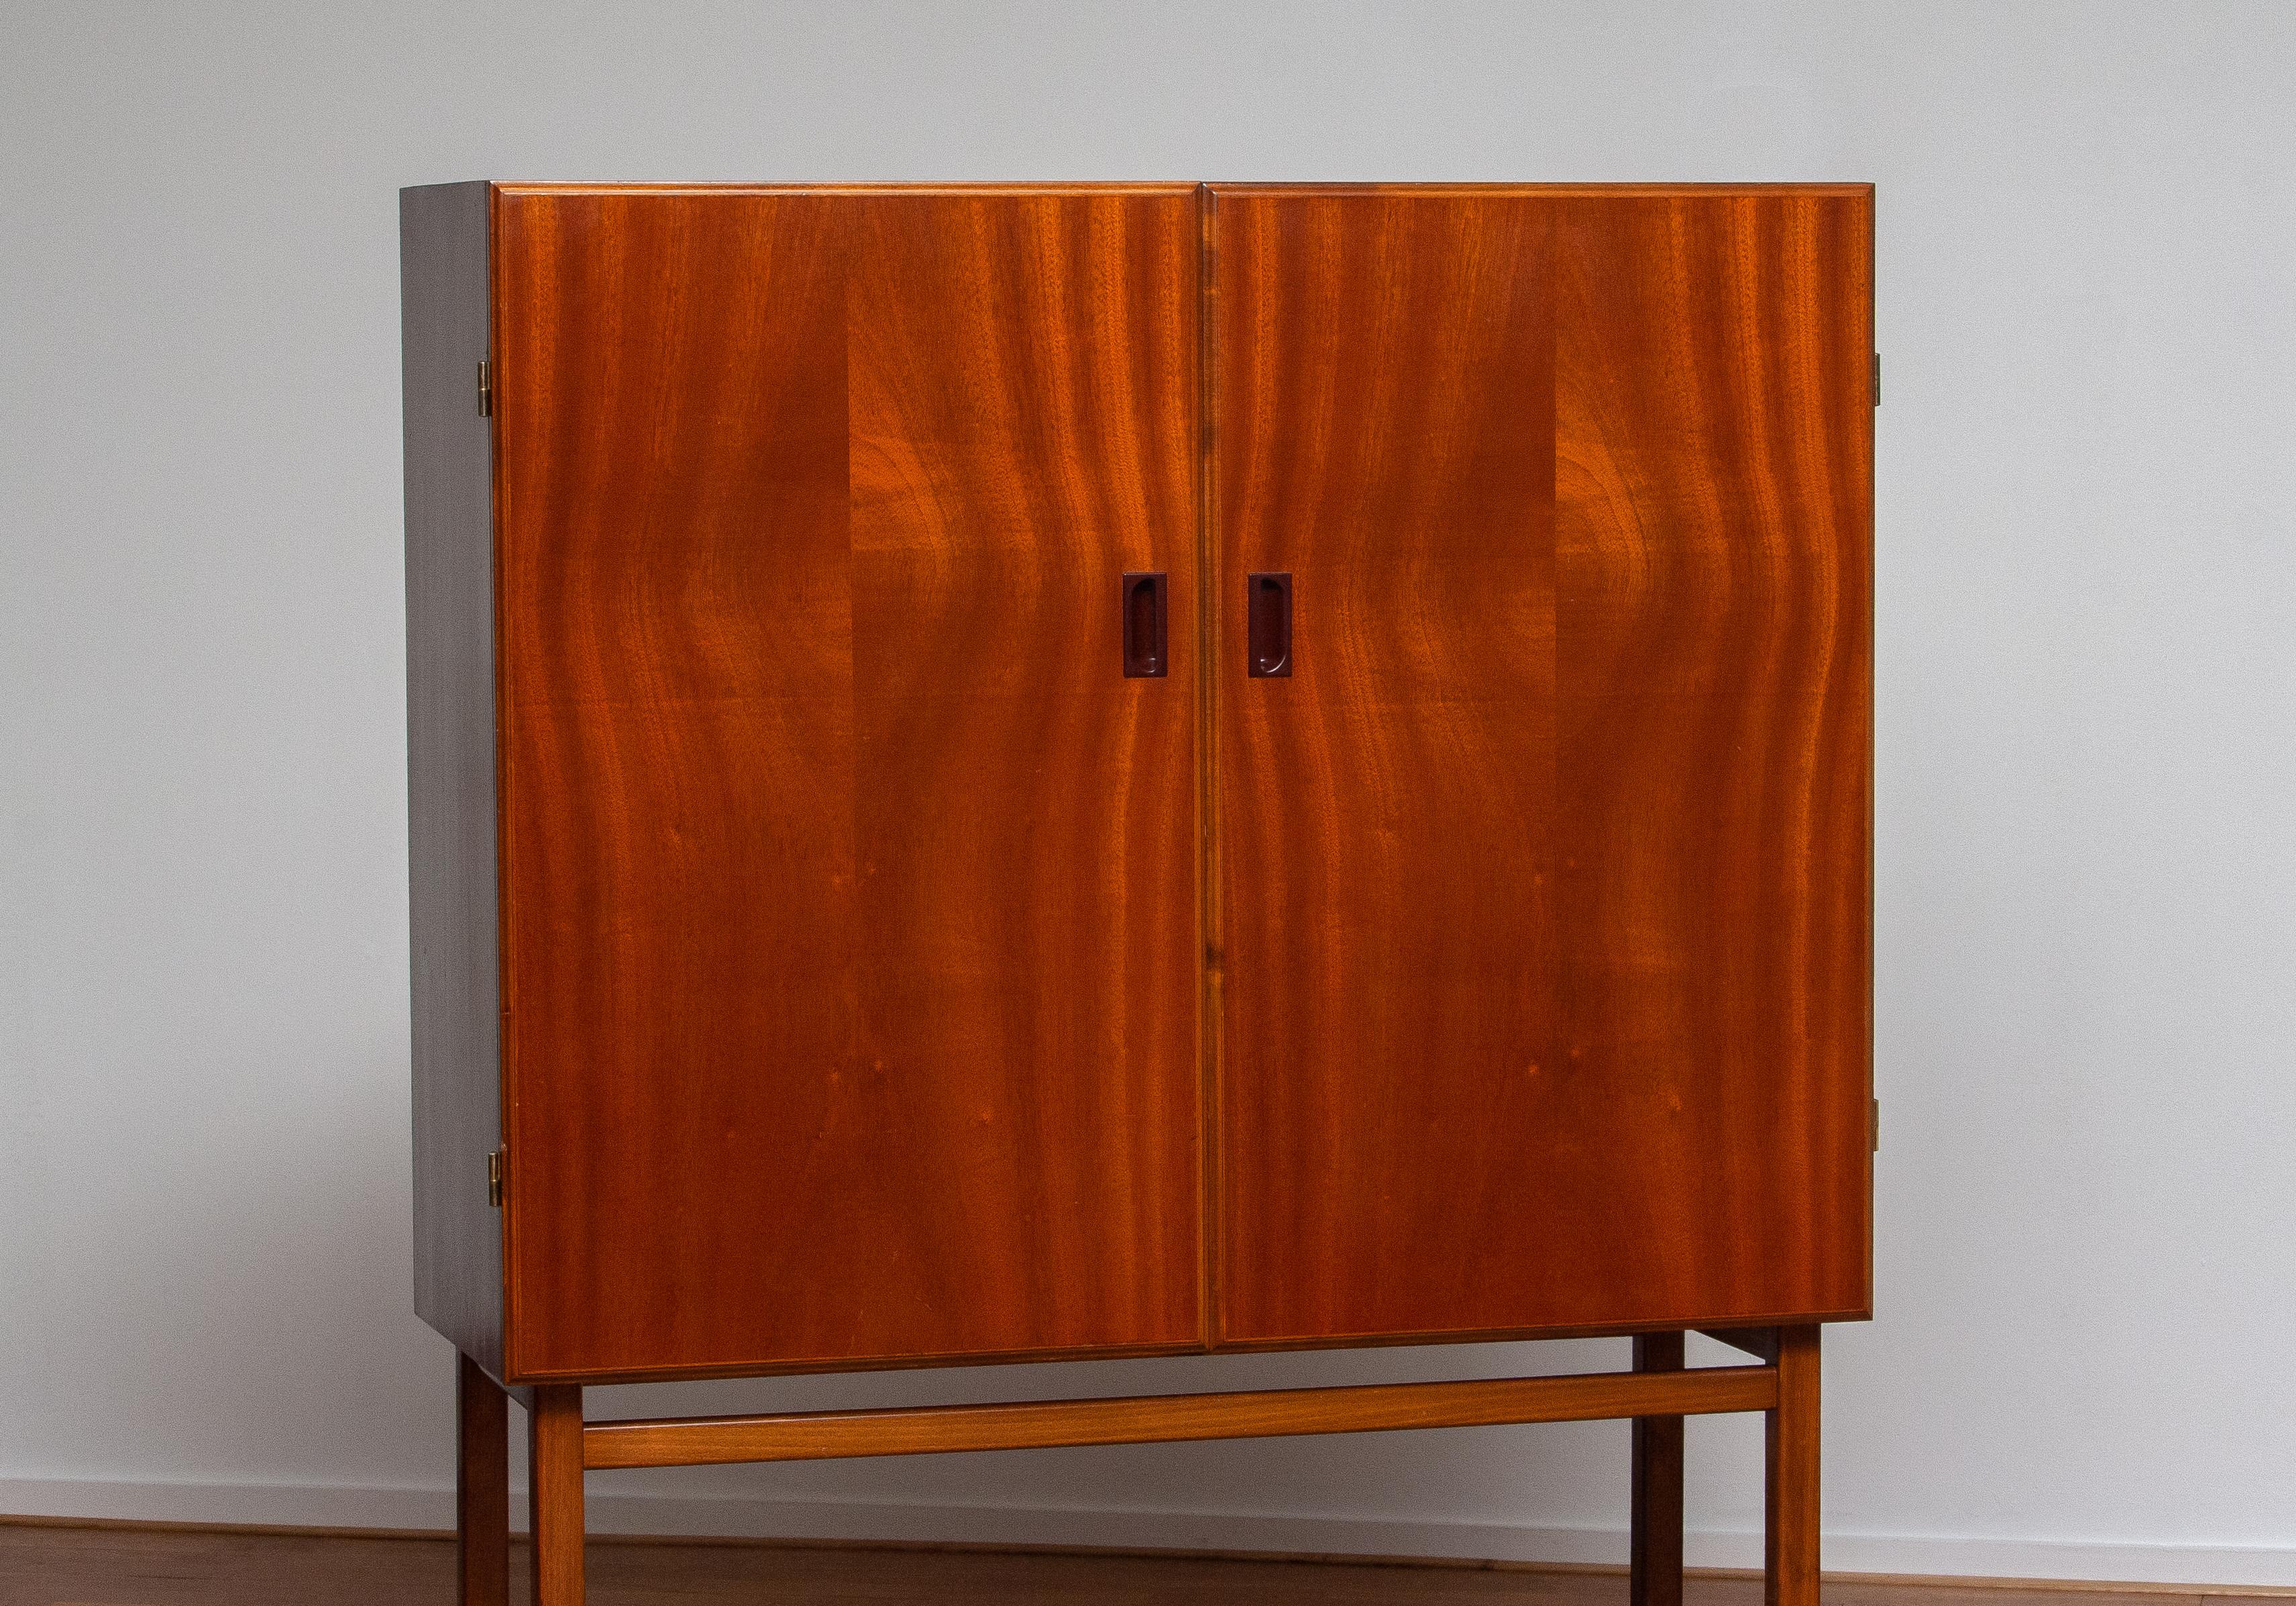 1950s, Slim Midcentury Mahogany Dry Bar or Cabinet by Forenades Mobler, Sweden 1